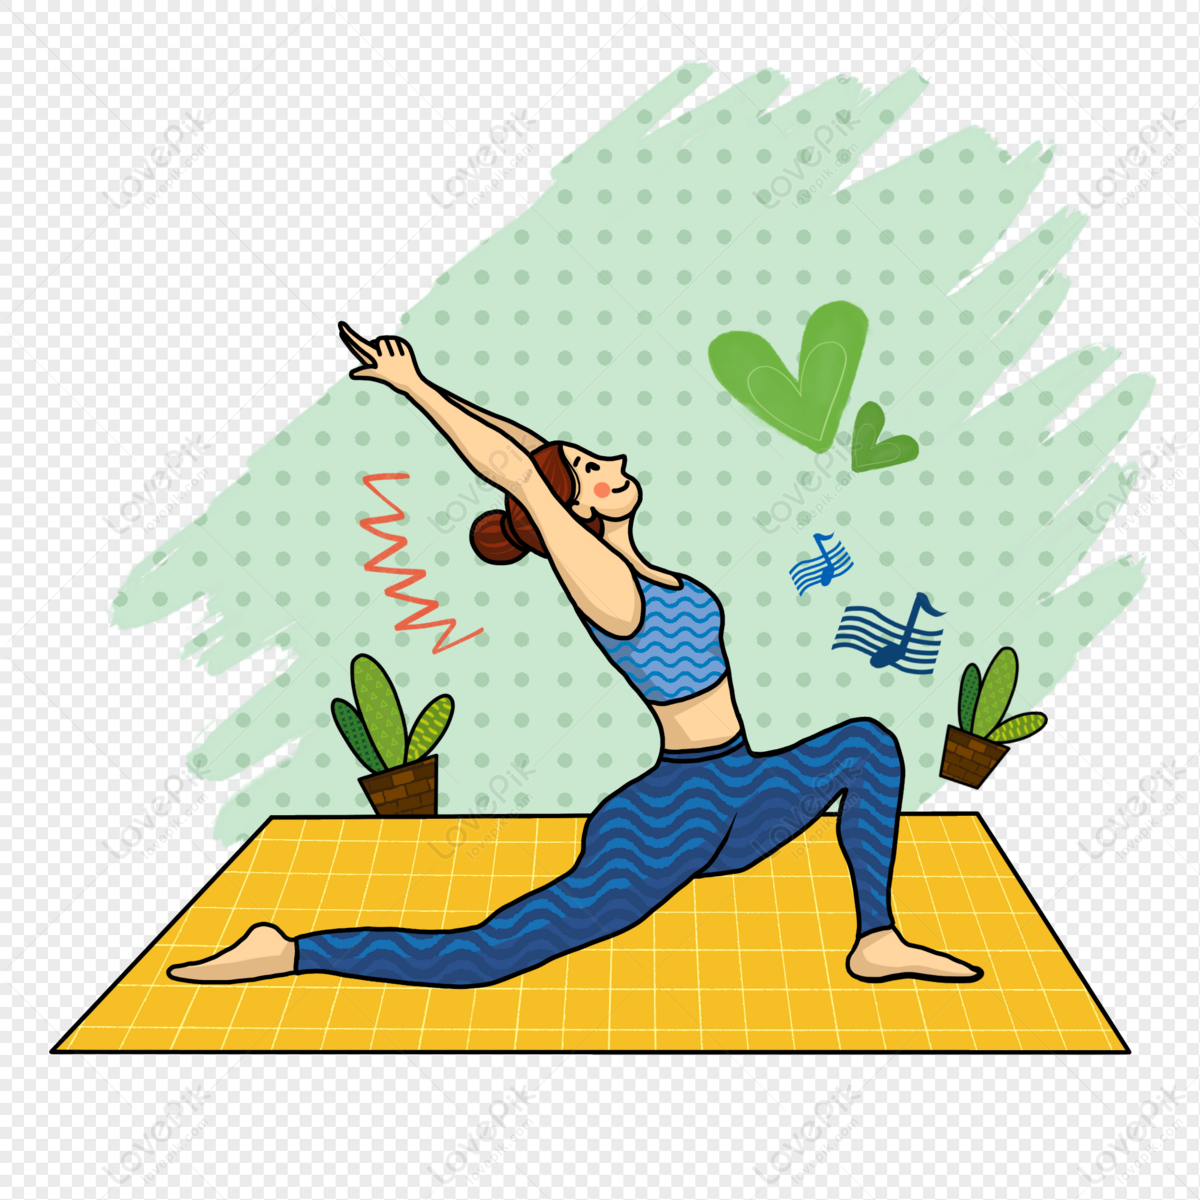 Yoga Cartoon Illustration Free PNG And Clipart Image For Free Download -  Lovepik | 401337799